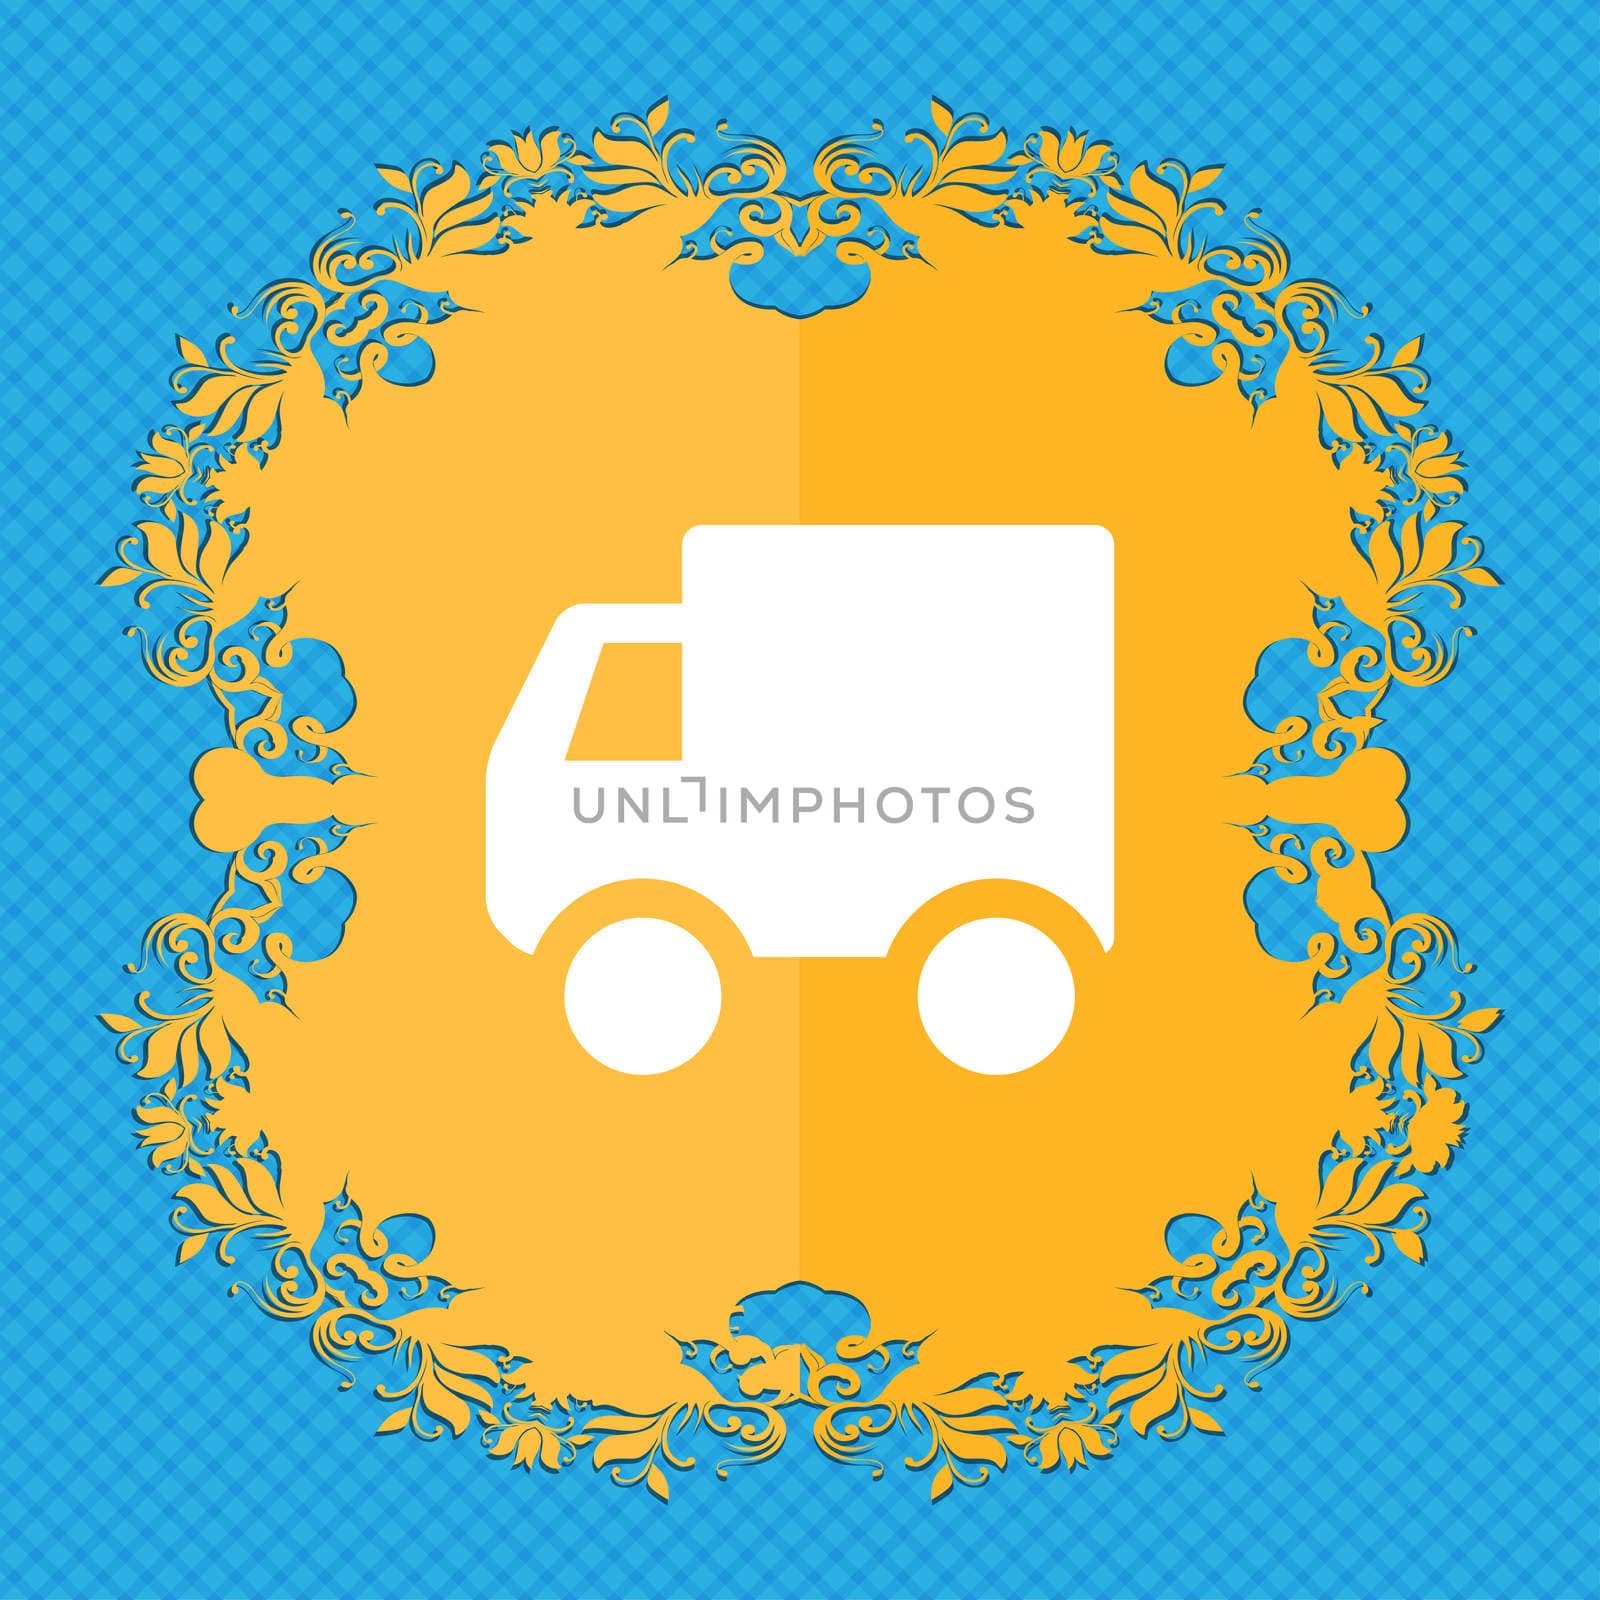 Delivery truck . Floral flat design on a blue abstract background with place for your text. illustration